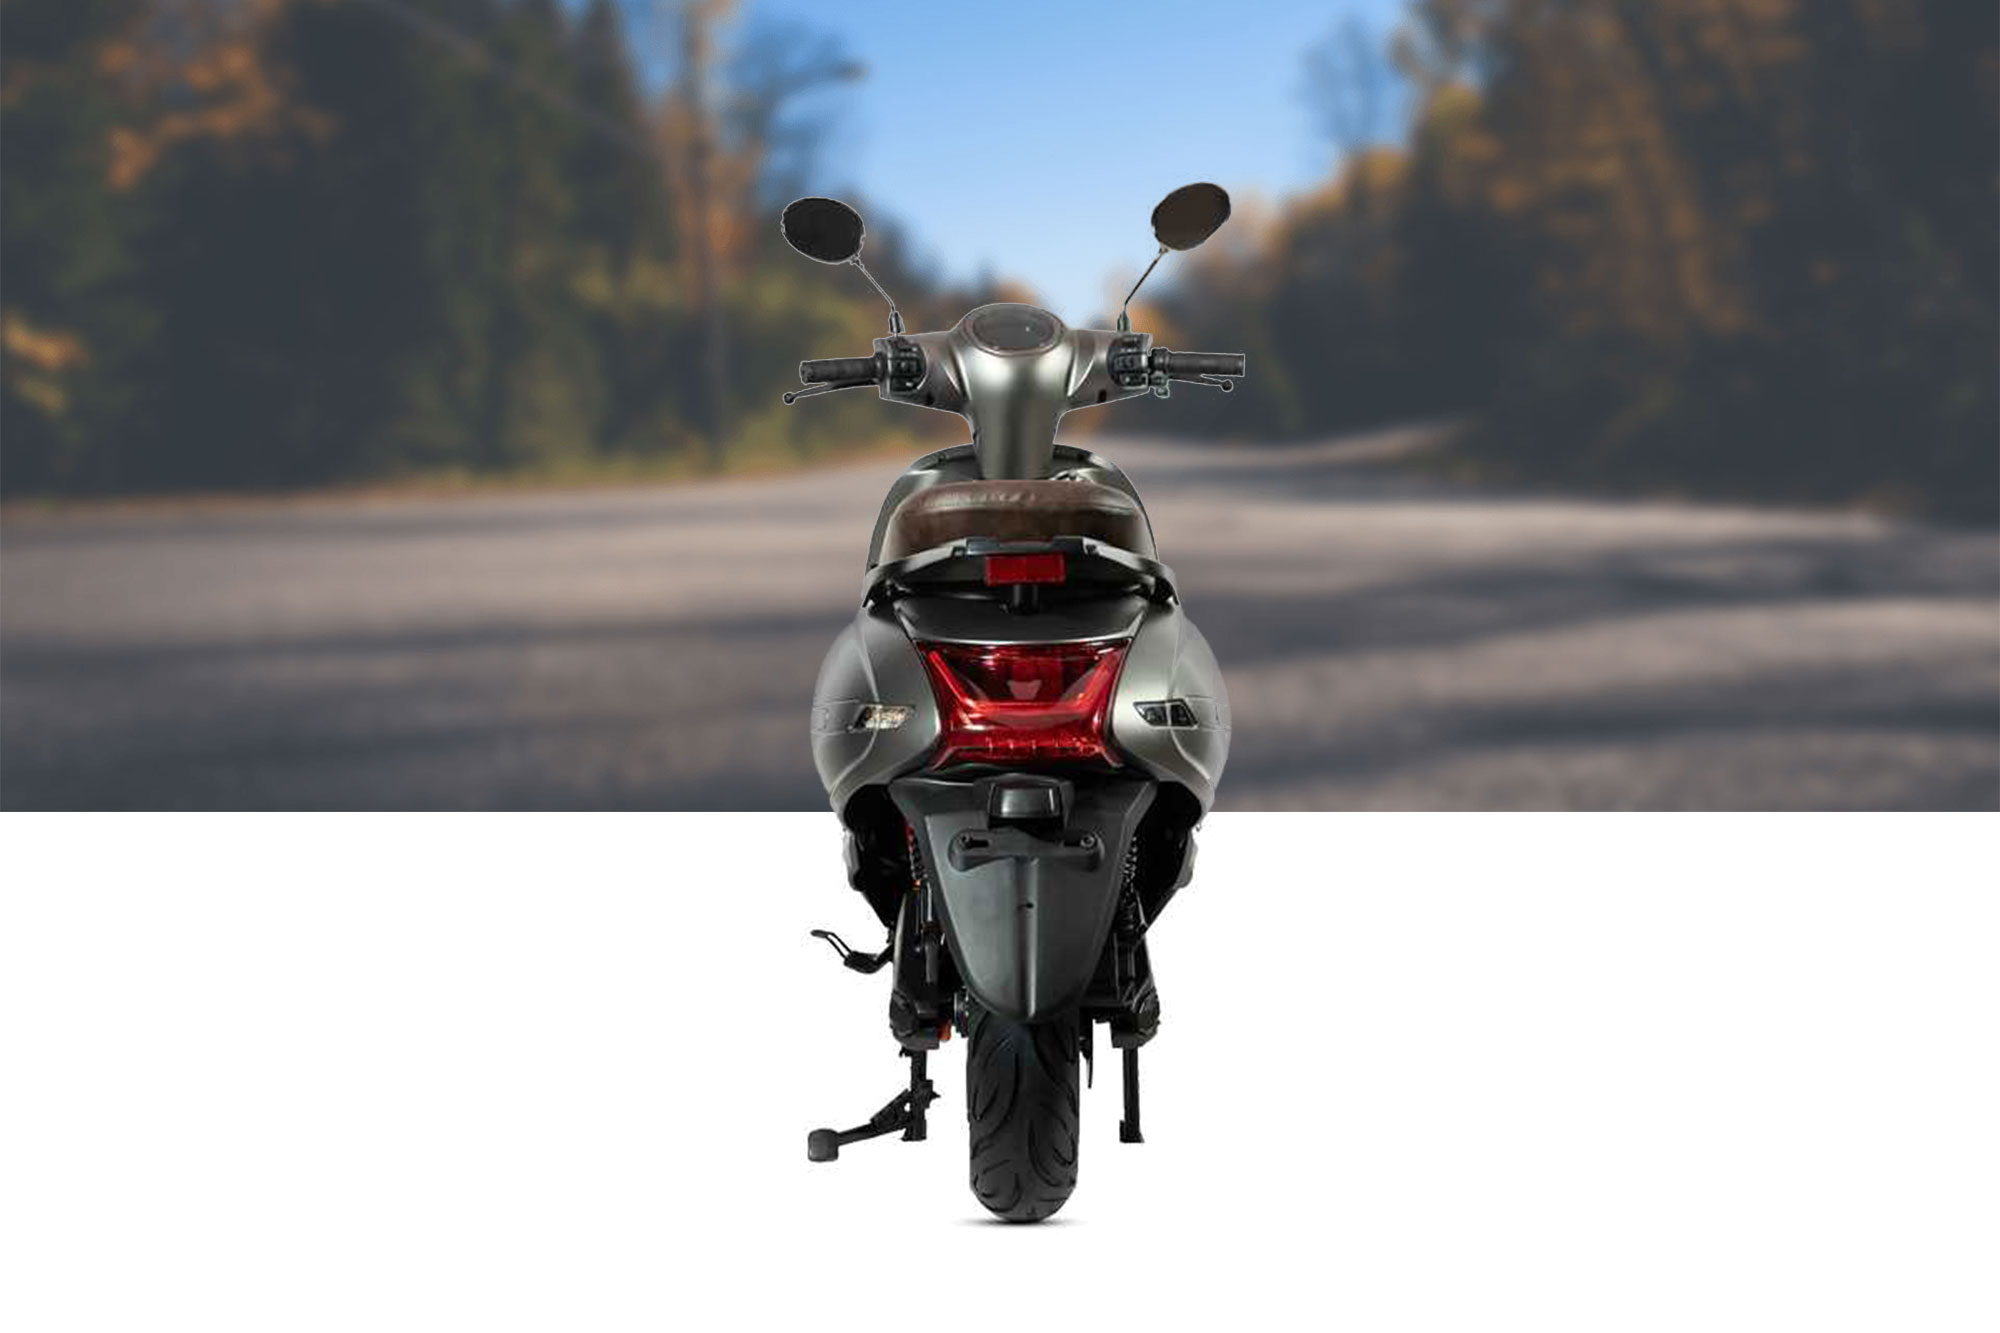 scooter-50-scooter-125-eccho-AC_940105